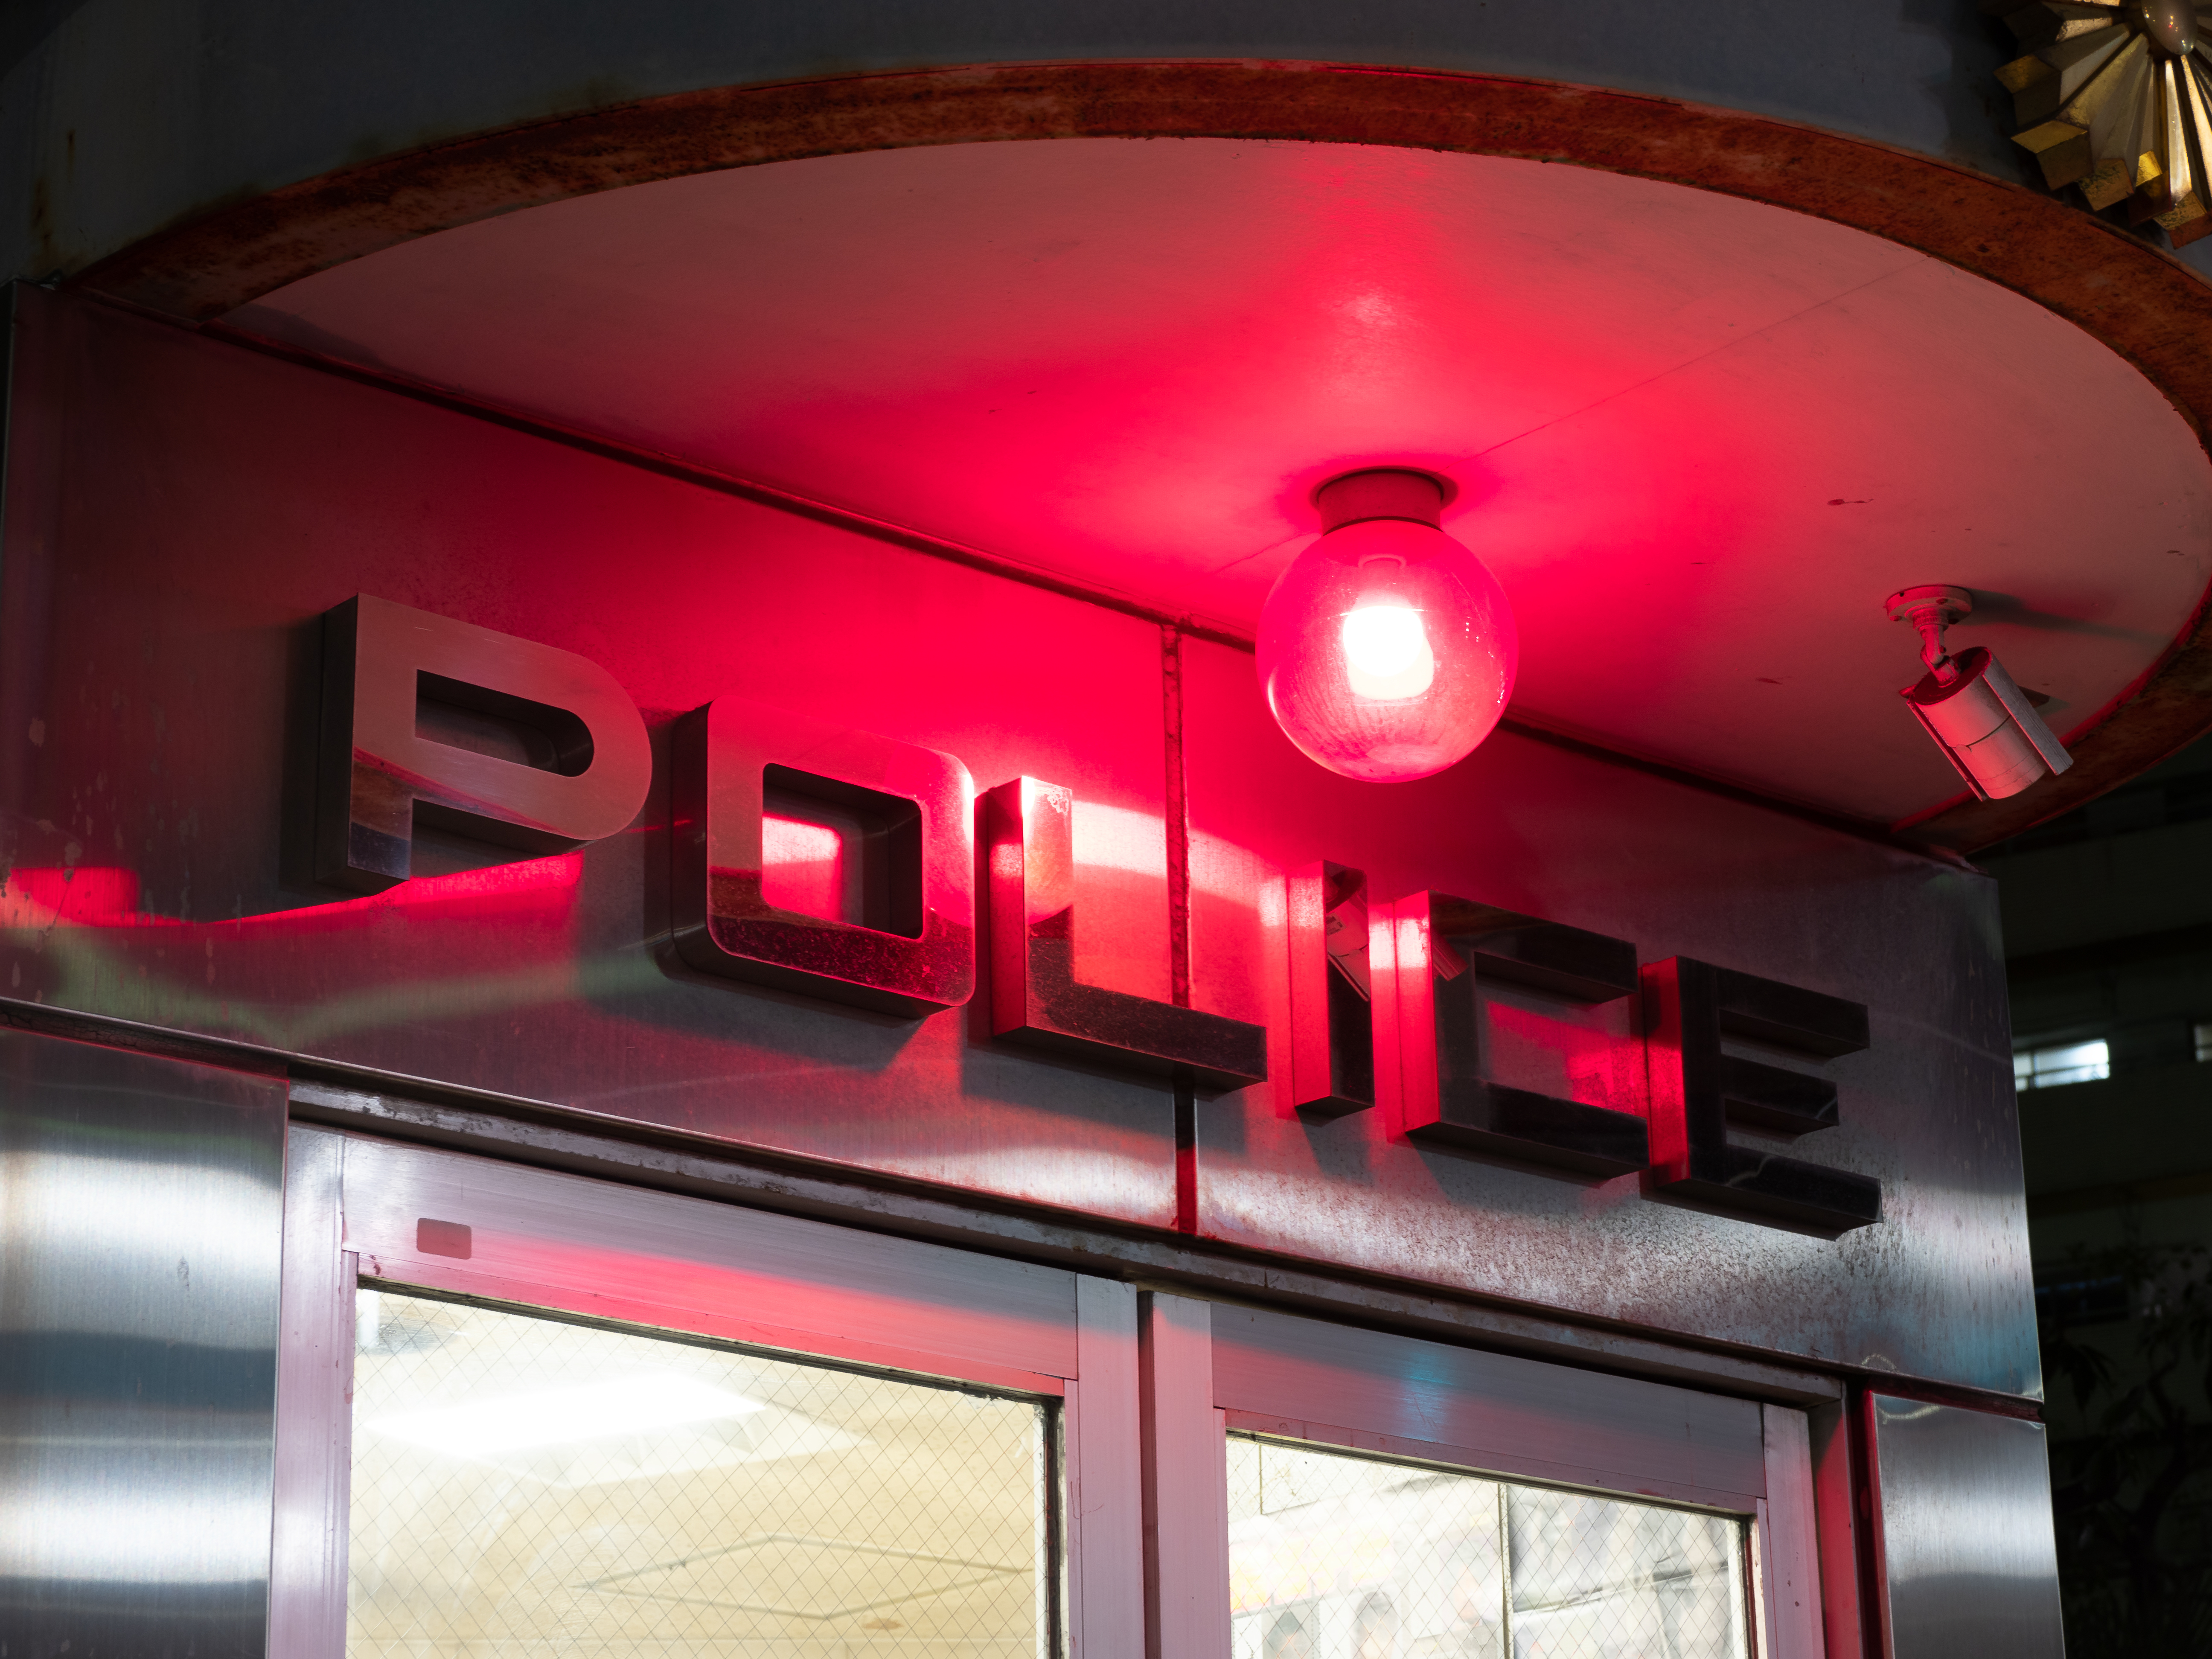 Police box red lamp | Source: Shutterstock